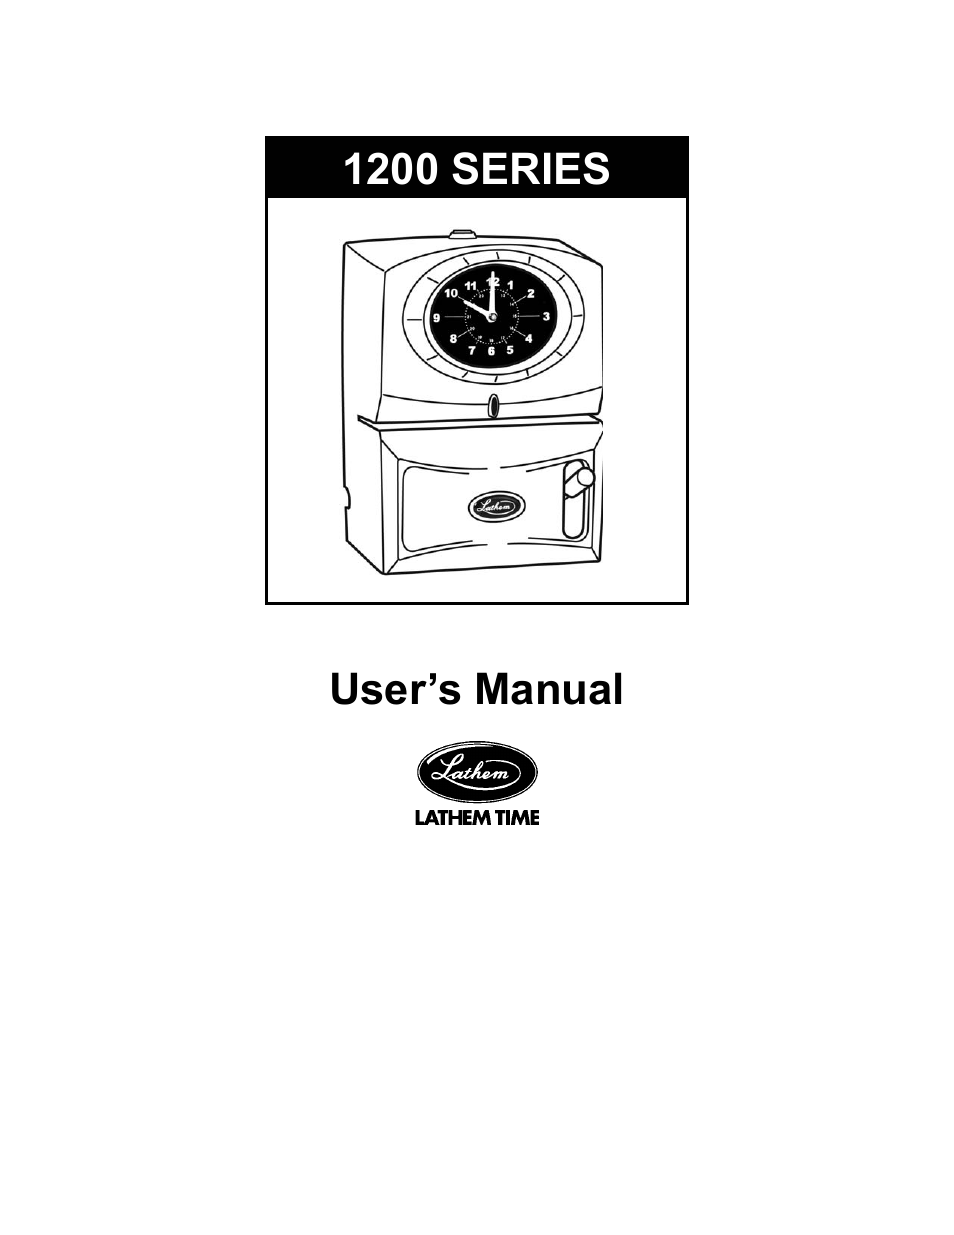 1200 Series (Page 1)